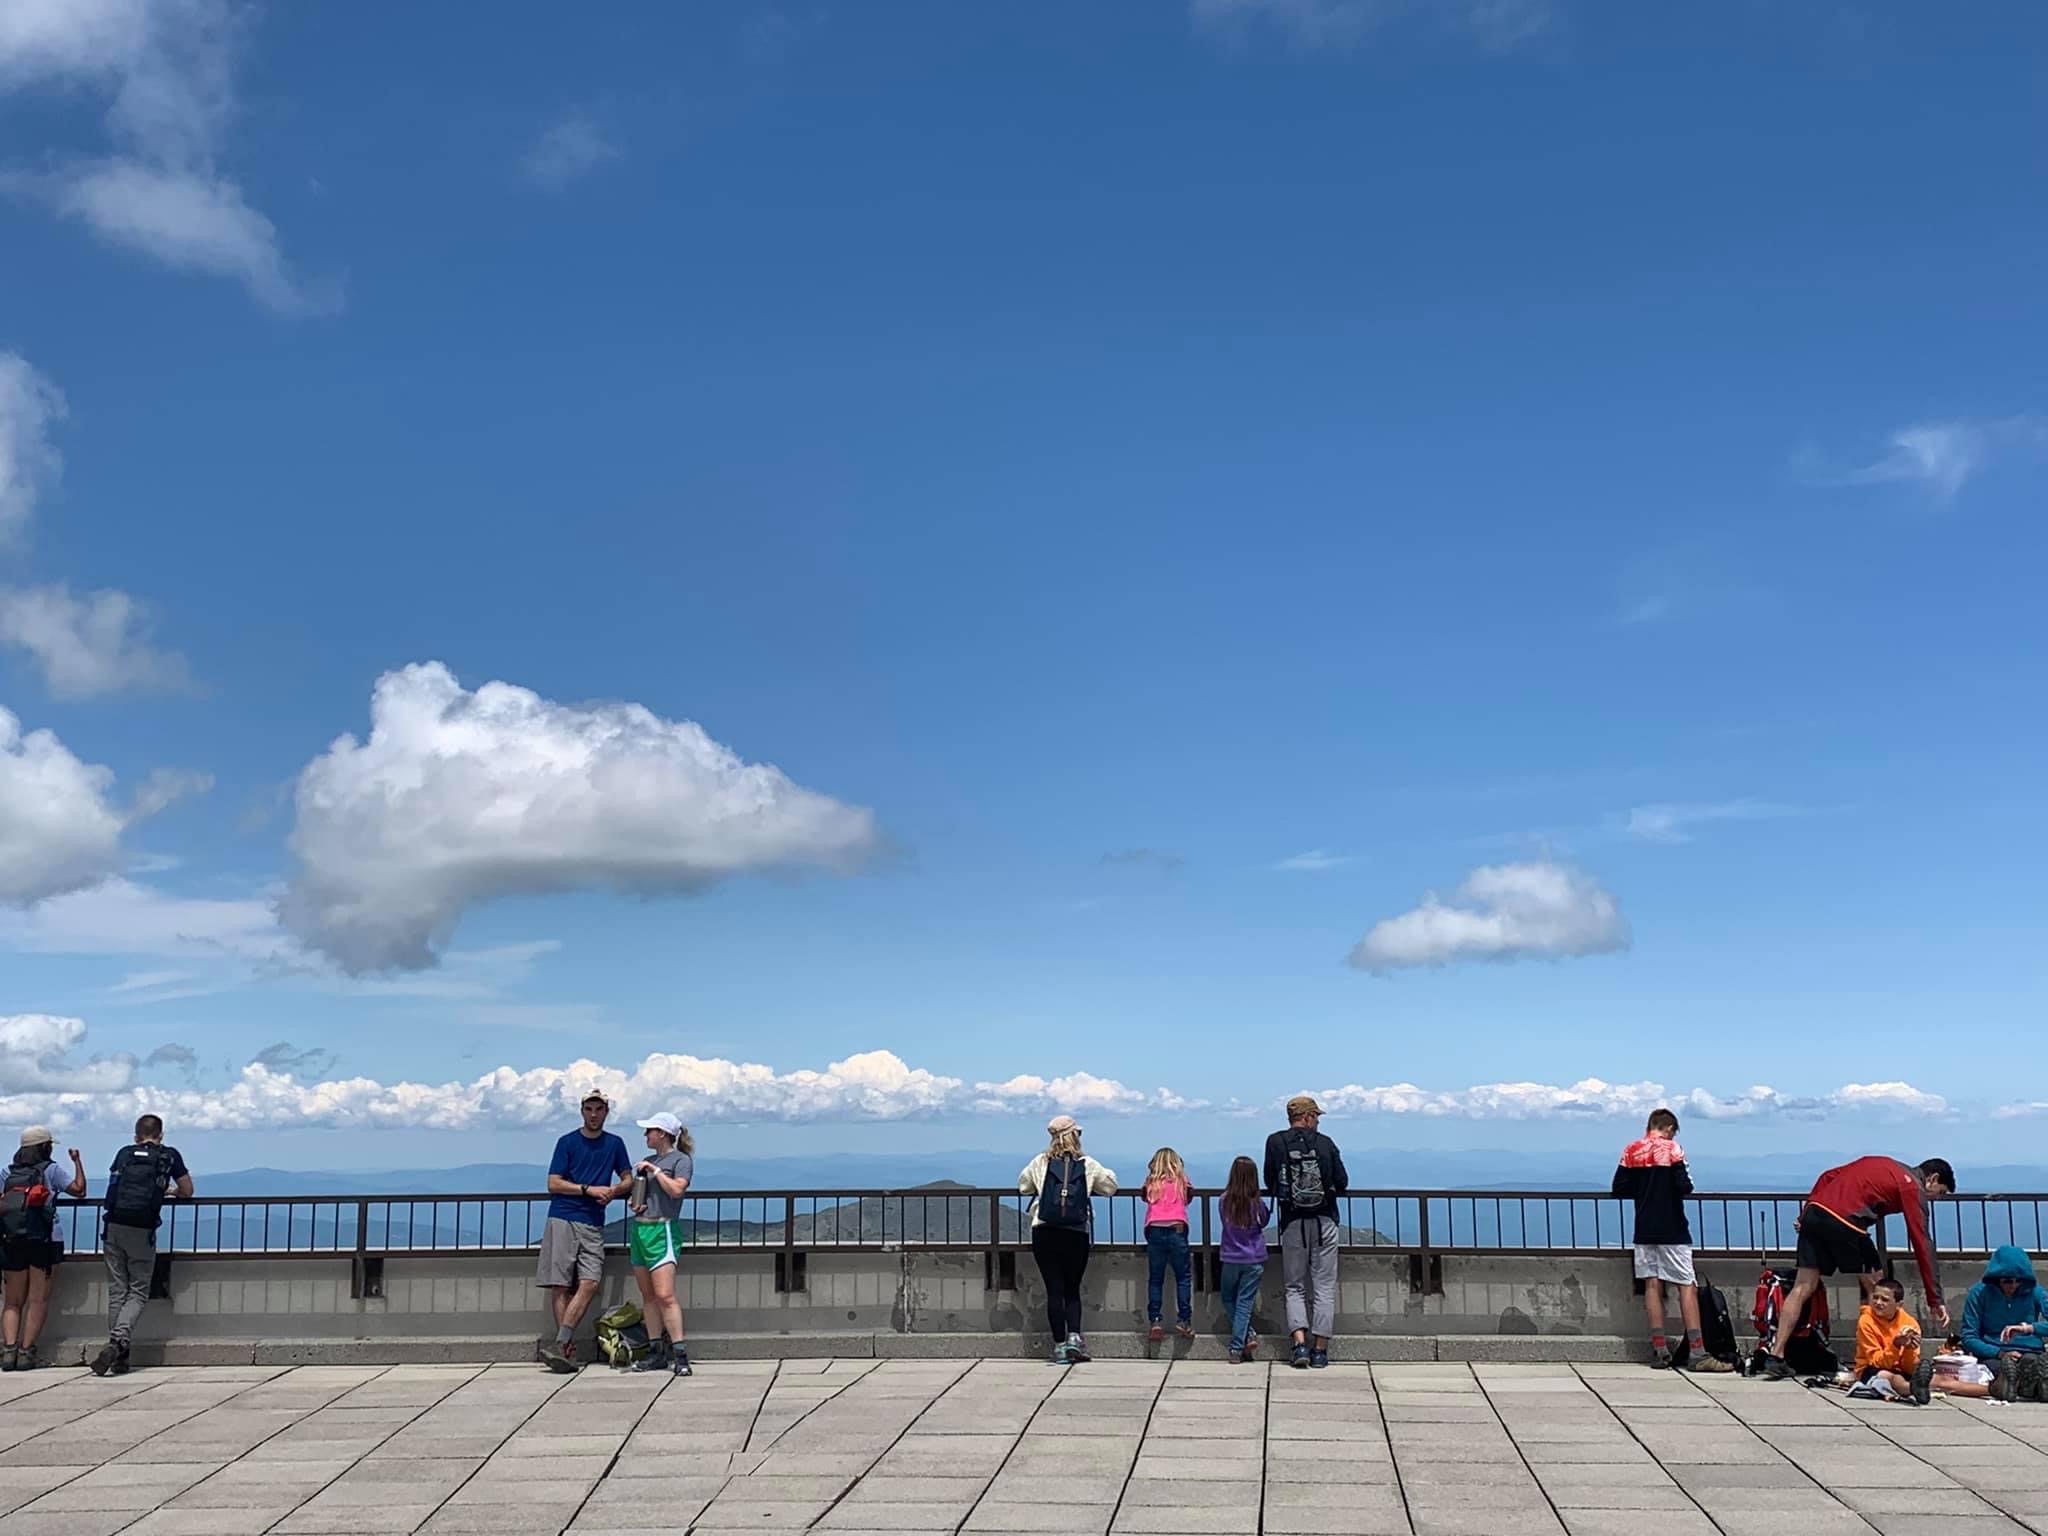 People stand along a railing taking in a view that is mostly blue sky and white puffy clouds.